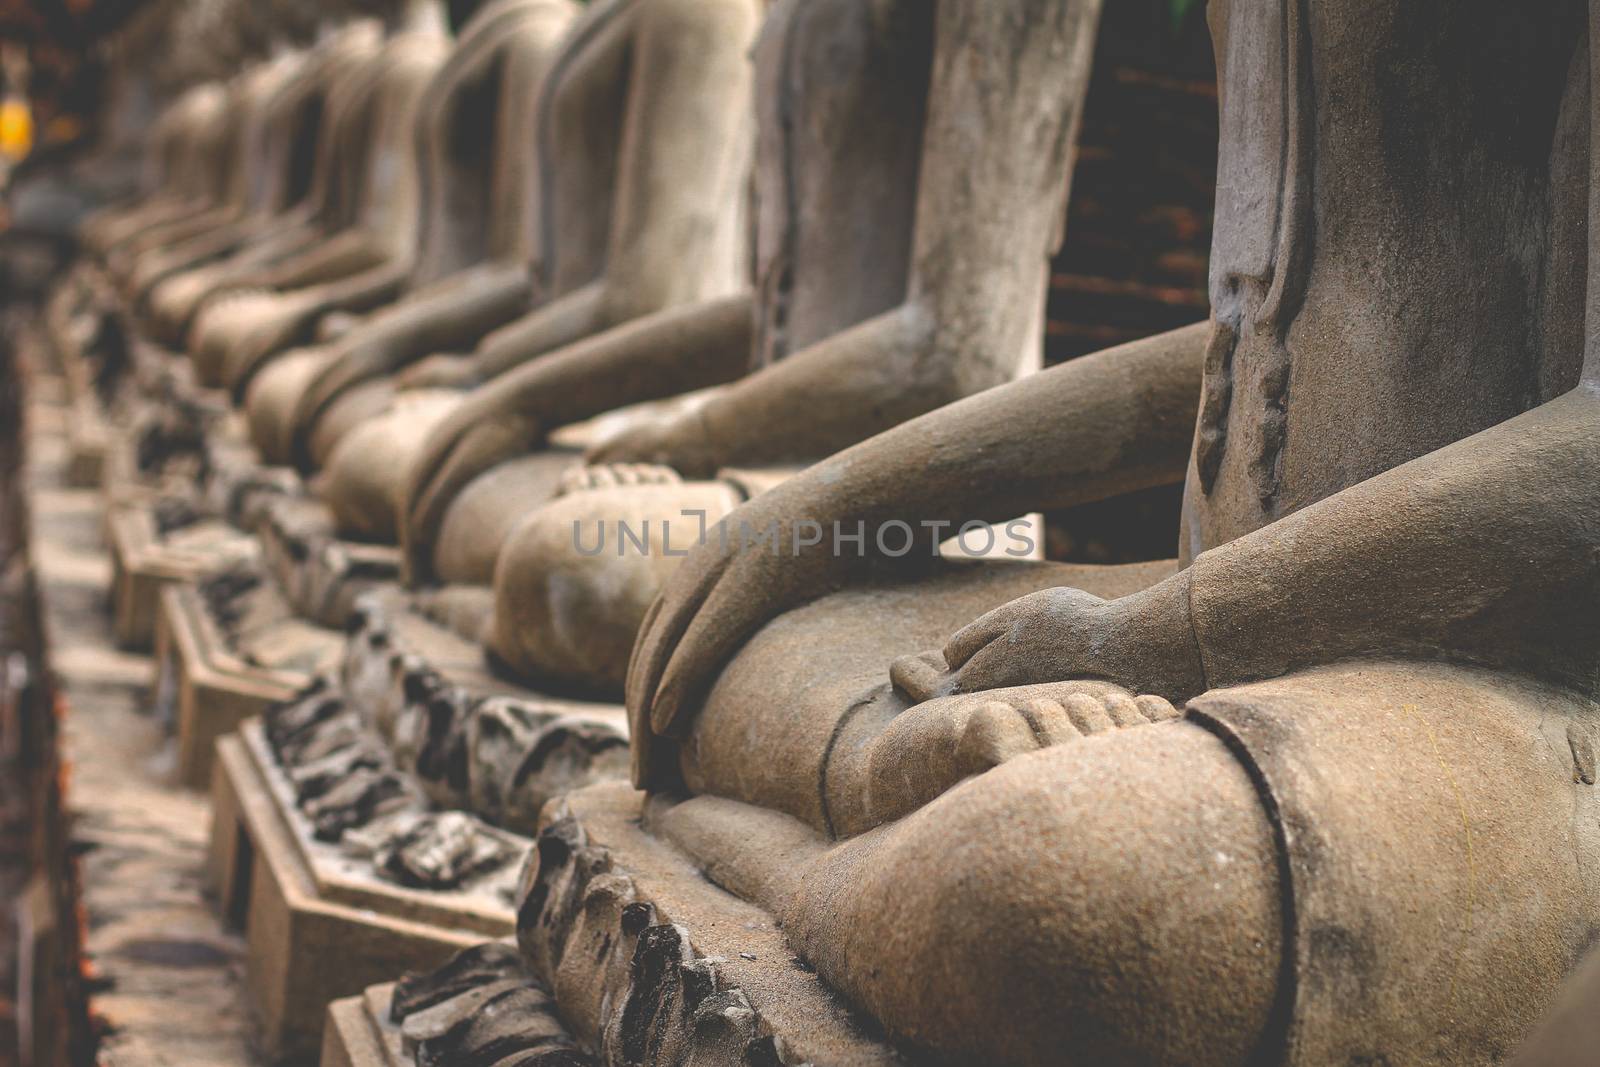 Cinematic photo of buddha statue hand in meditation pose to show the concept of harmony between mind and body, mindfulness and wellness